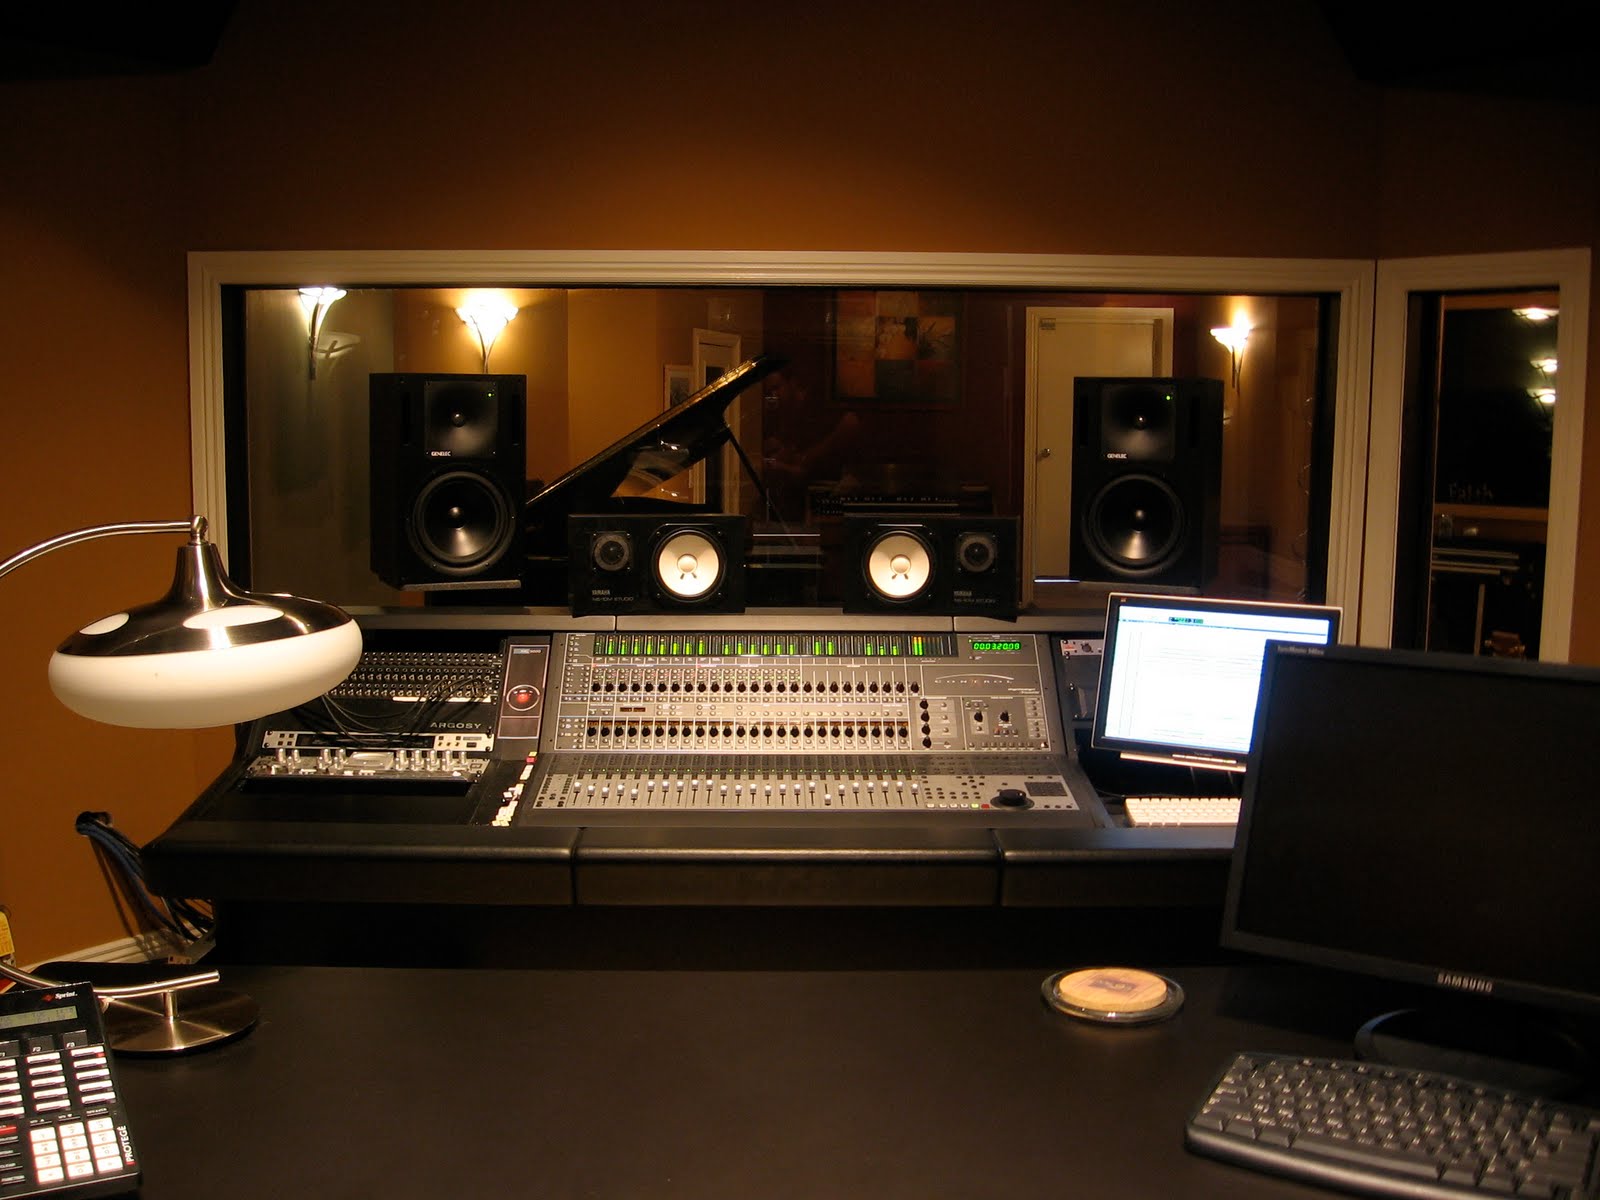 Best Woodworking Plans And Guide: Argosy Recording Studio ...